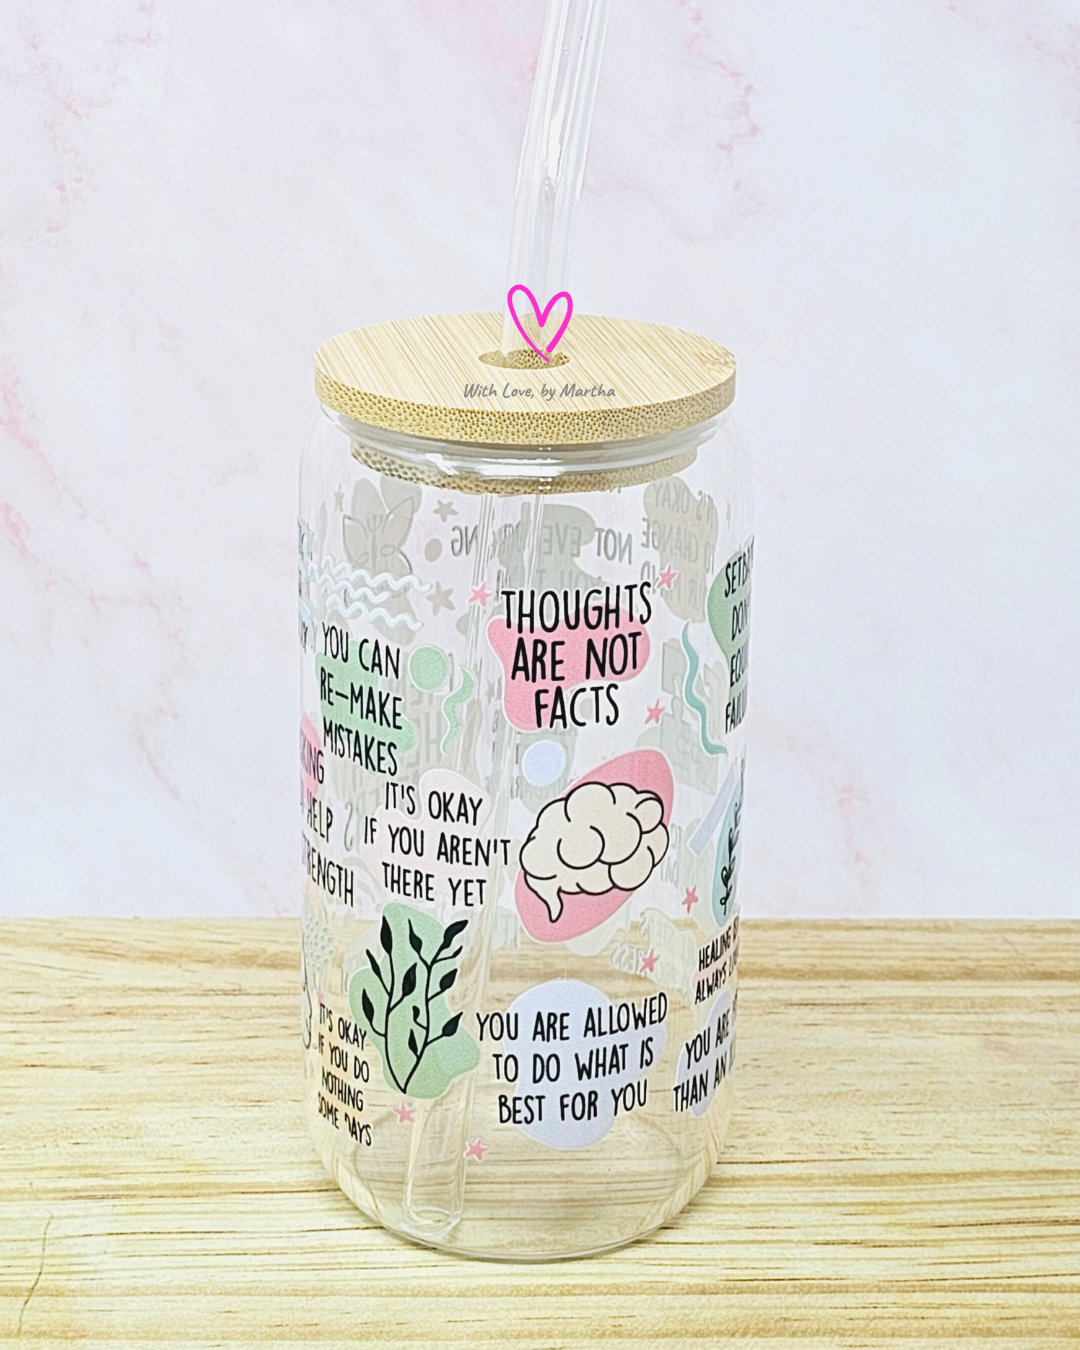 "Mental Health Matters" Glass Cup 16oz